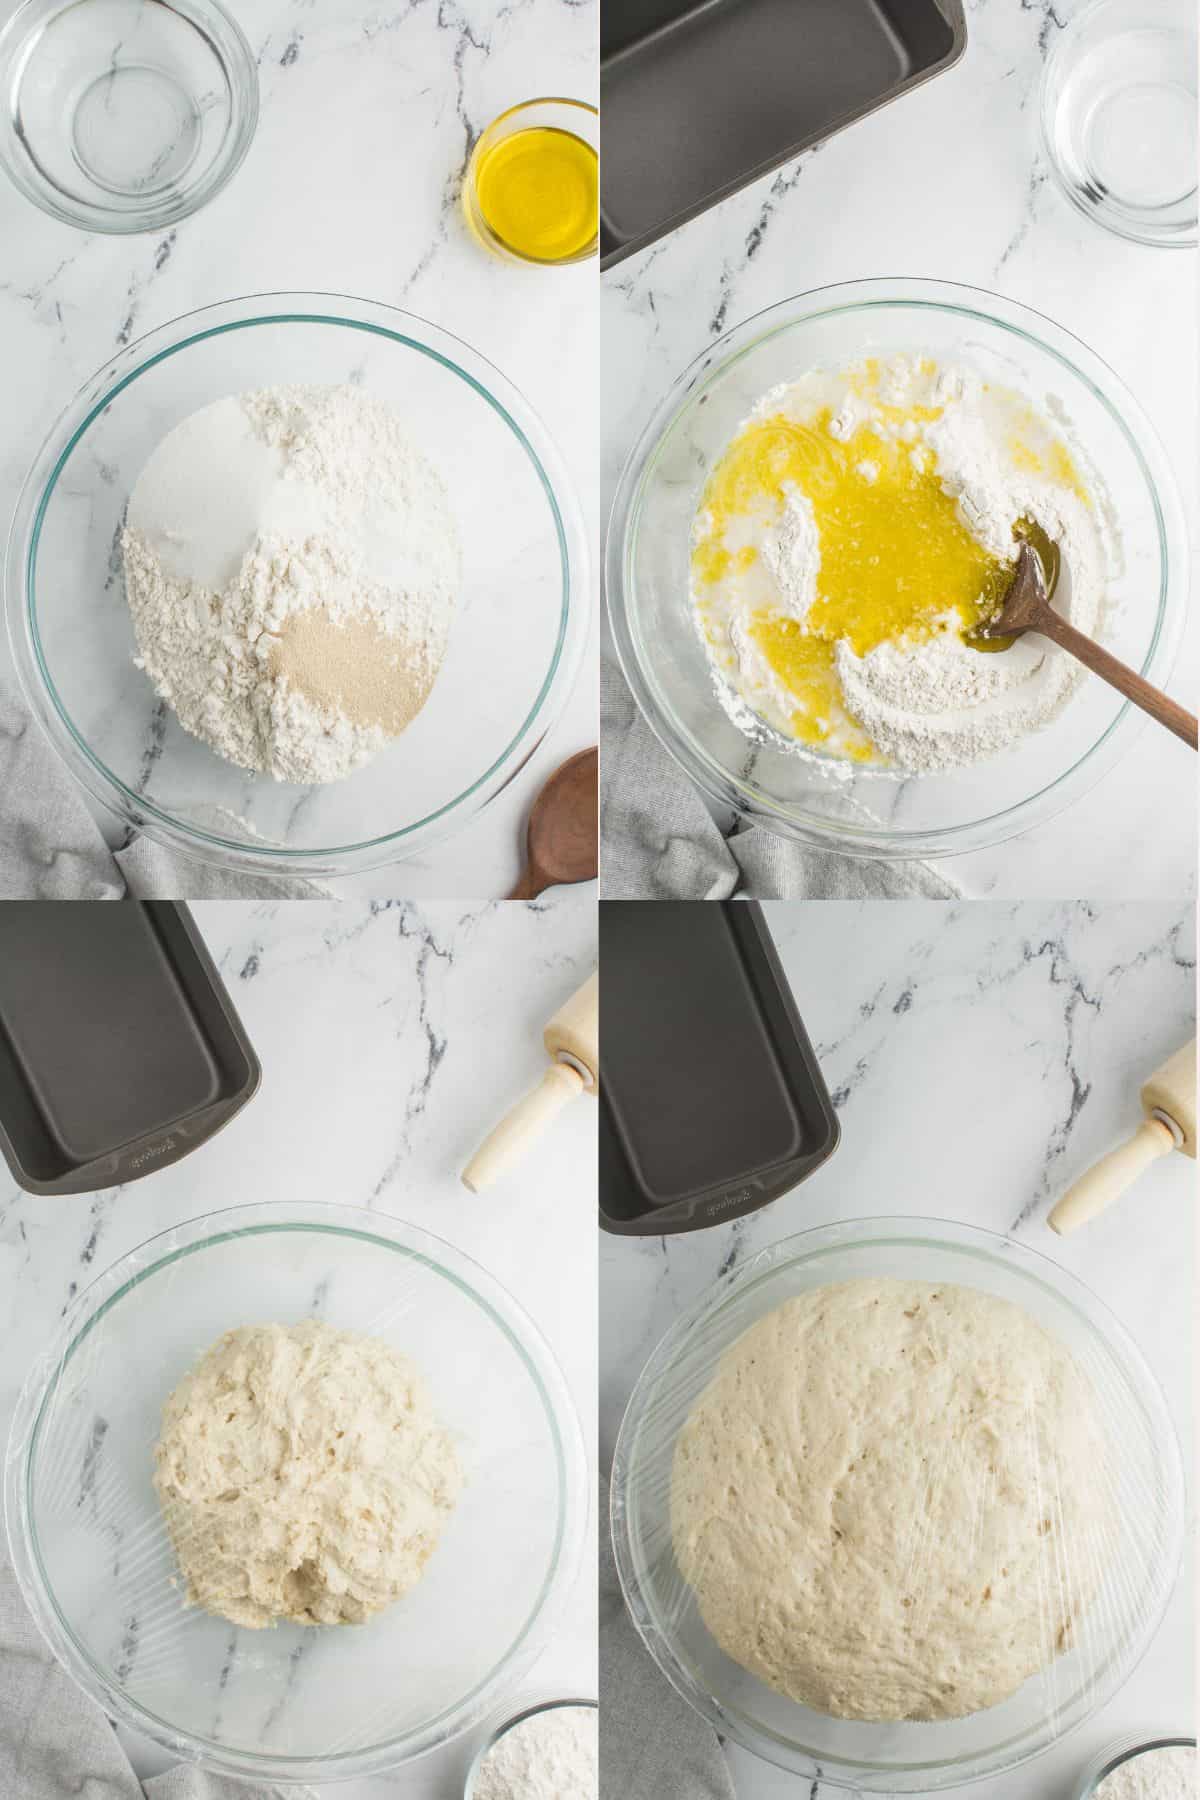 The collage includes four images: a bowl of dry ingredients, water and oil being added, mixed dough covered with plastic wrap, and the doubled-in-size dough.